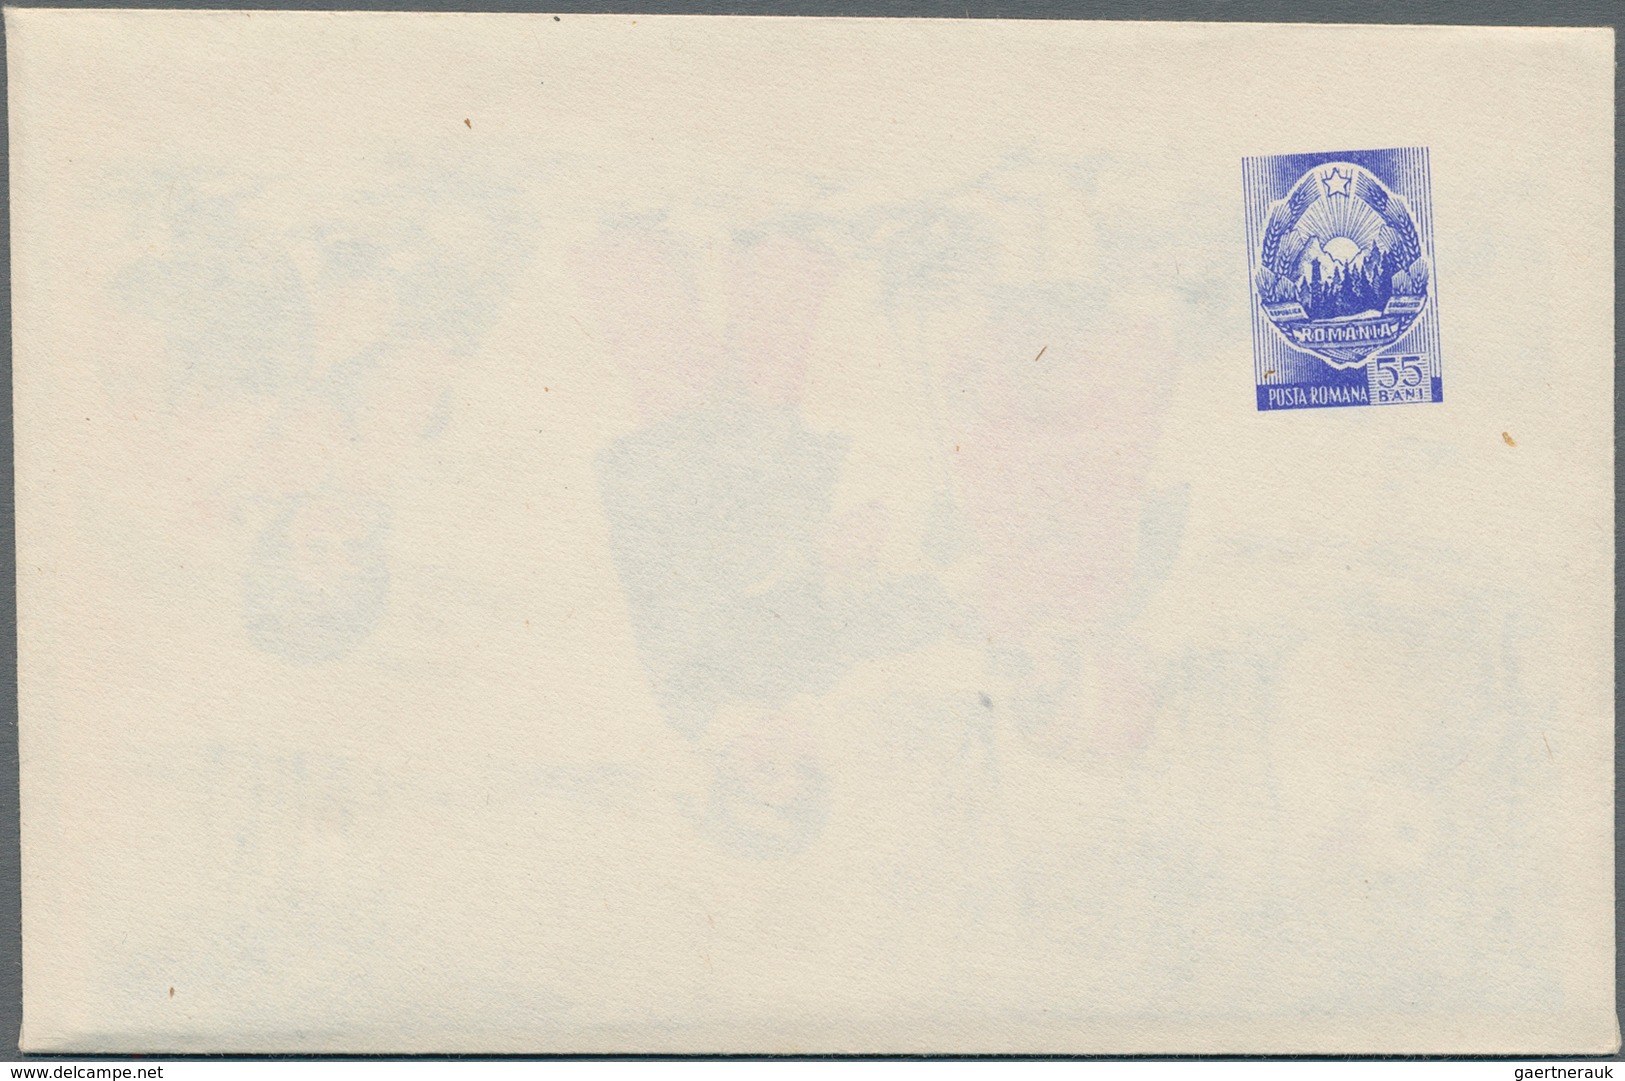 Rumänien - Ganzsachen: 1961/81 (ca.) holding of about 310 mostly unused postal stationery, while man